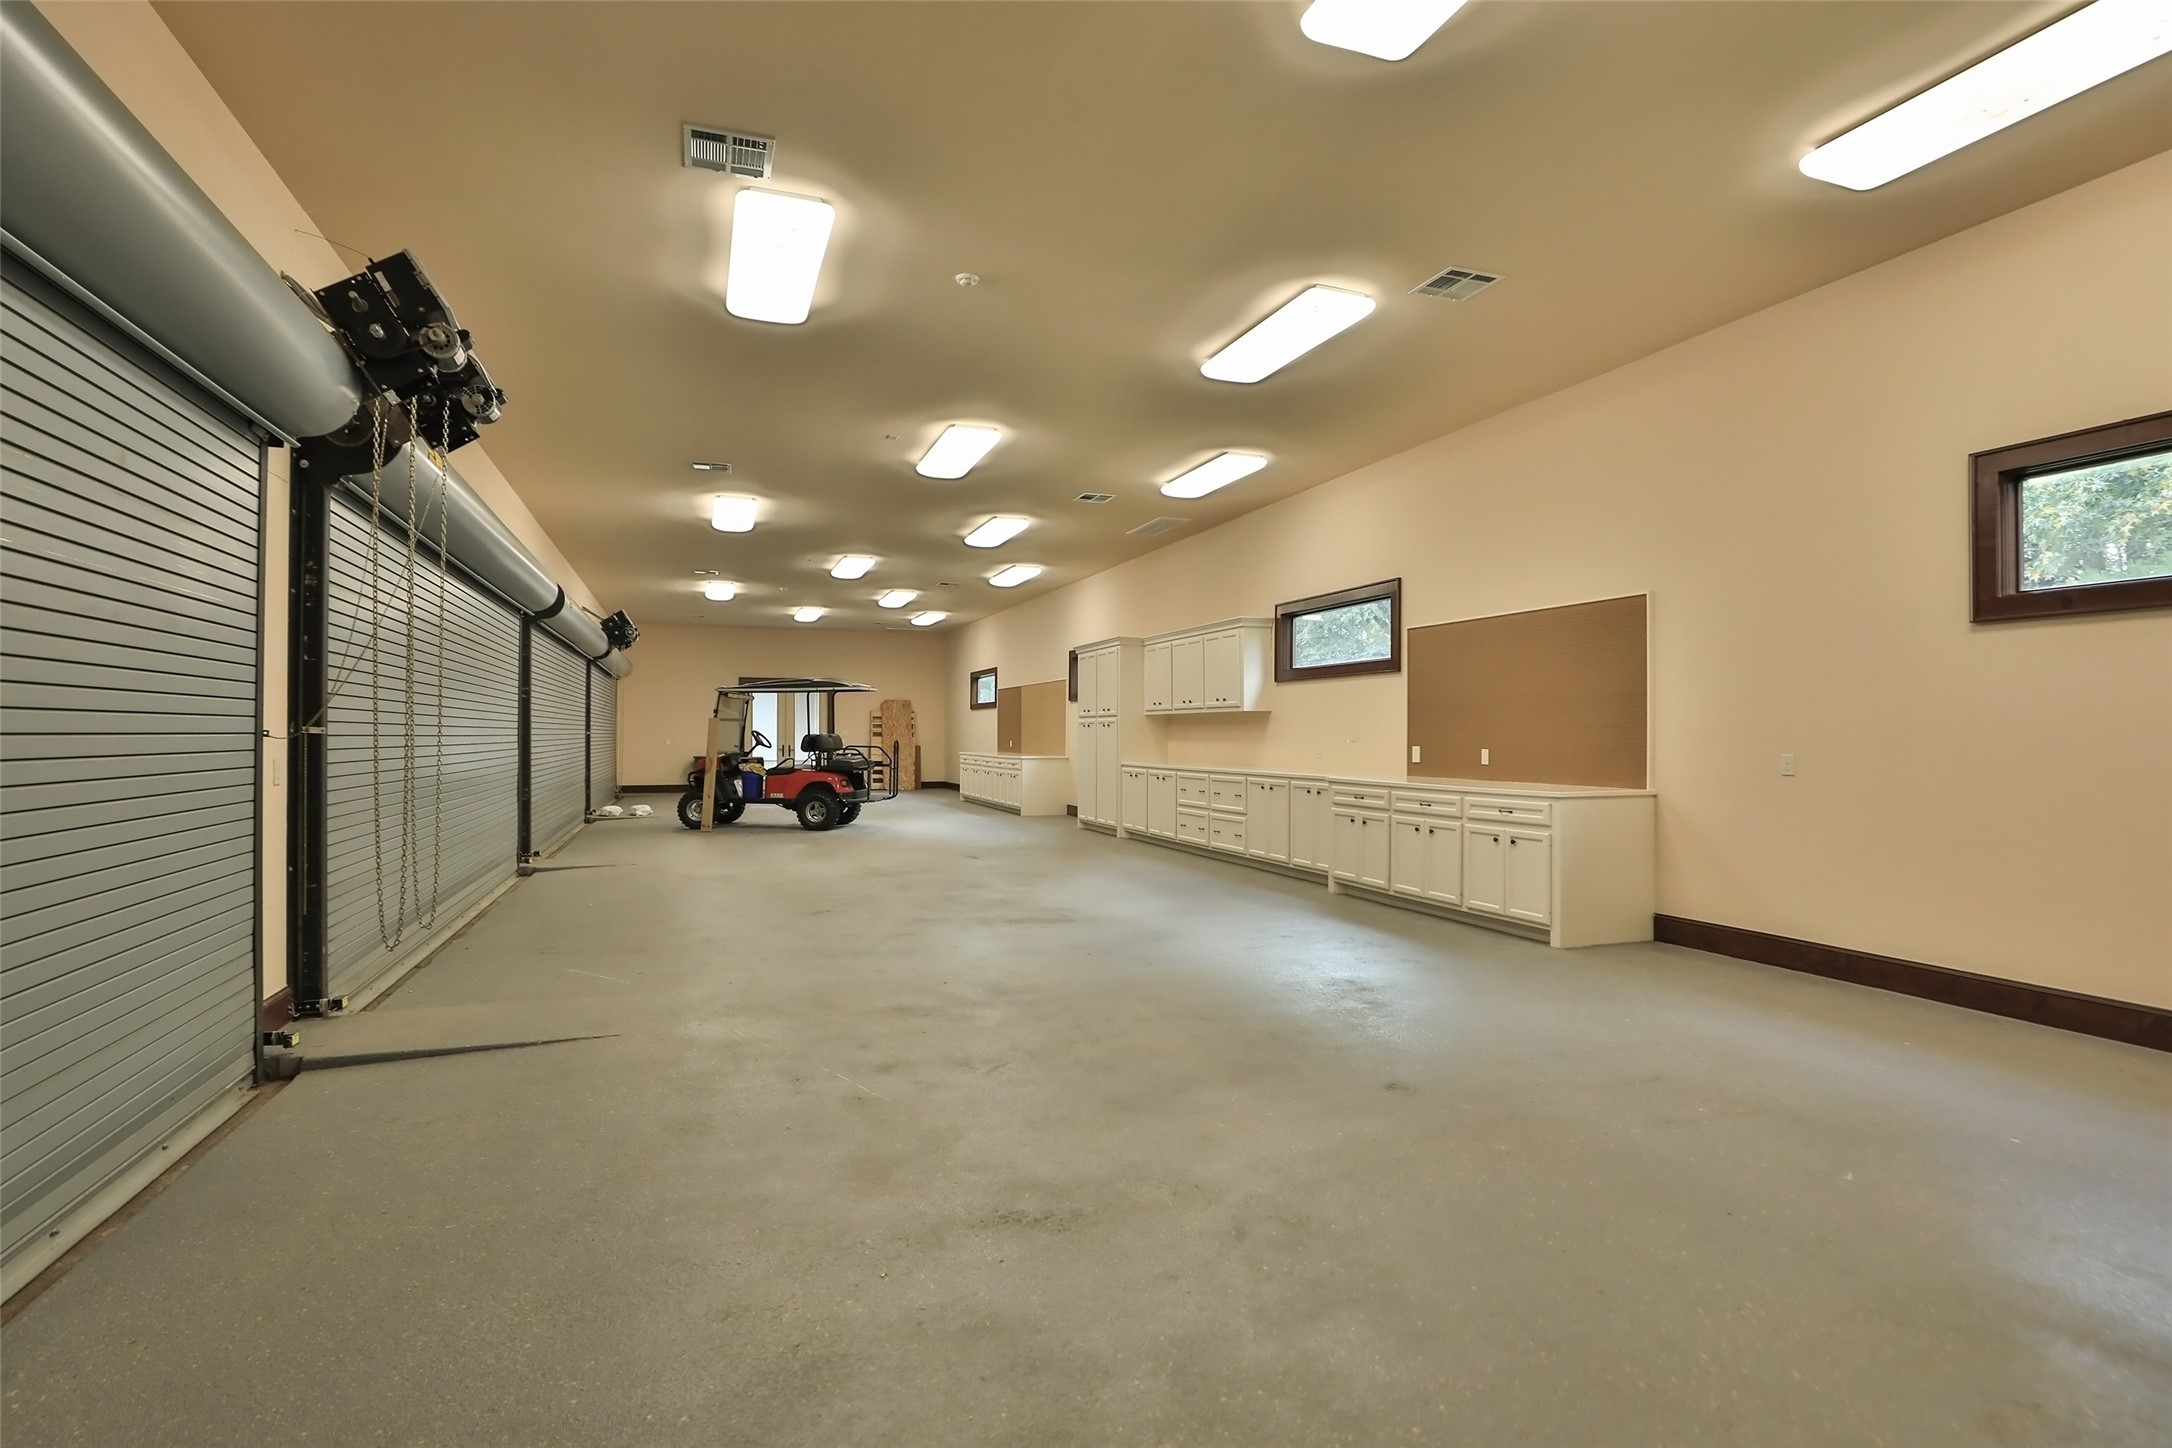 This extraordinary 8 car epoxy garage is A/C and heated. Heavy duty garage doors and plenty of lighting is featured. Built-ins for your workshop.